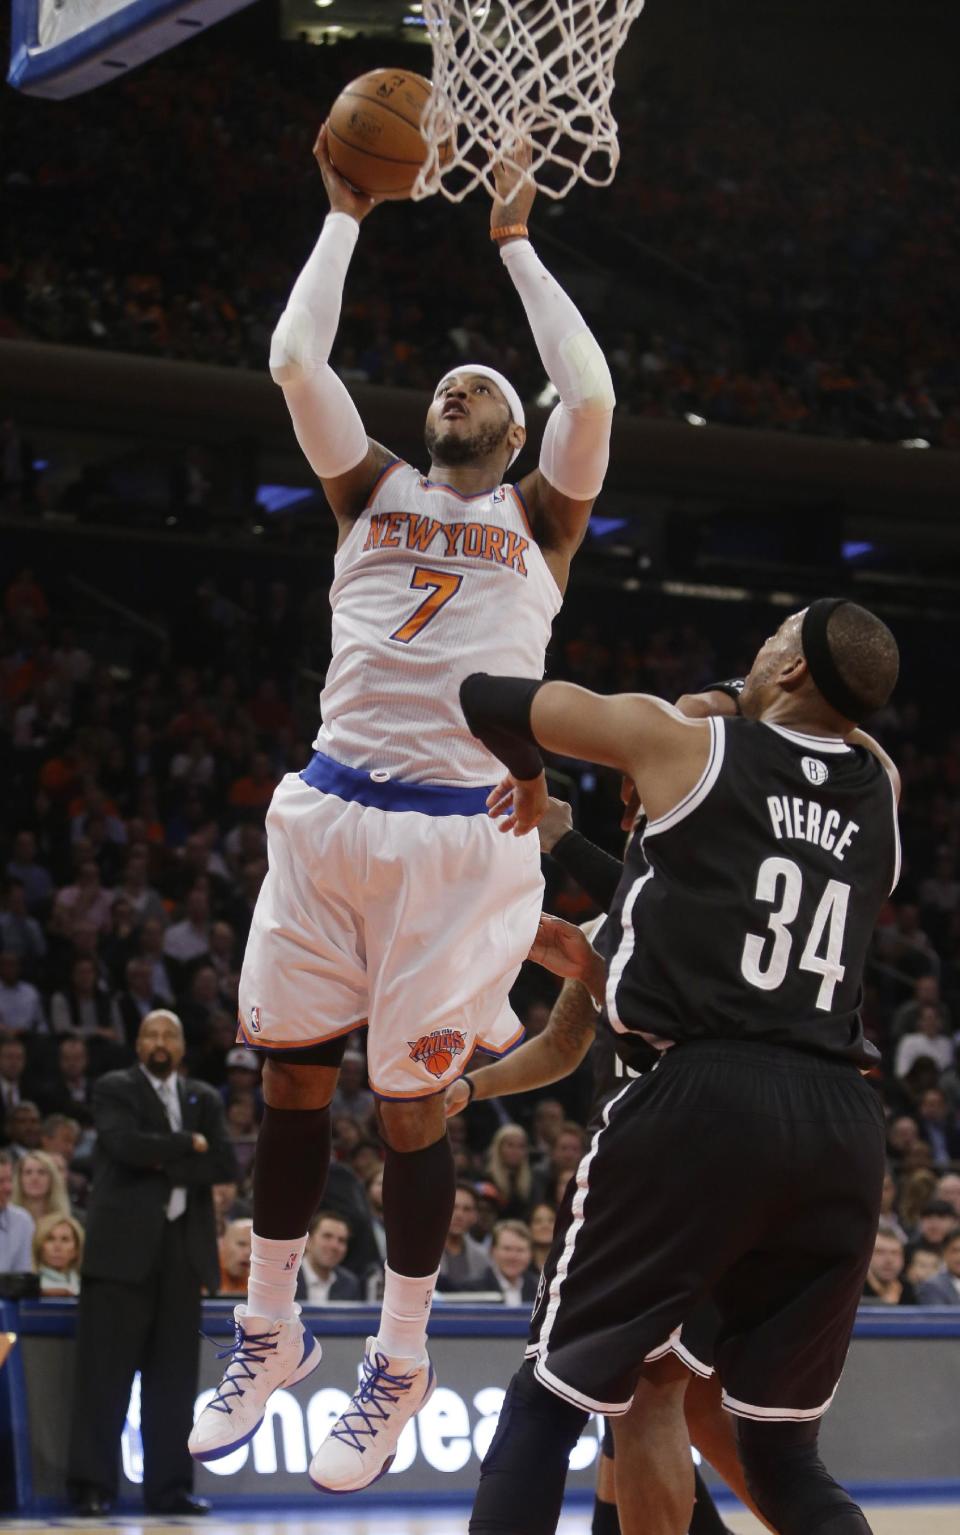 New York Knicks' Carmelo Anthony (7) shoots over Brooklyn Nets' Paul Pierce (34) during the first half of an NBA basketball game Wednesday, April 2, 2014, in New York. (AP Photo/Frank Franklin II)